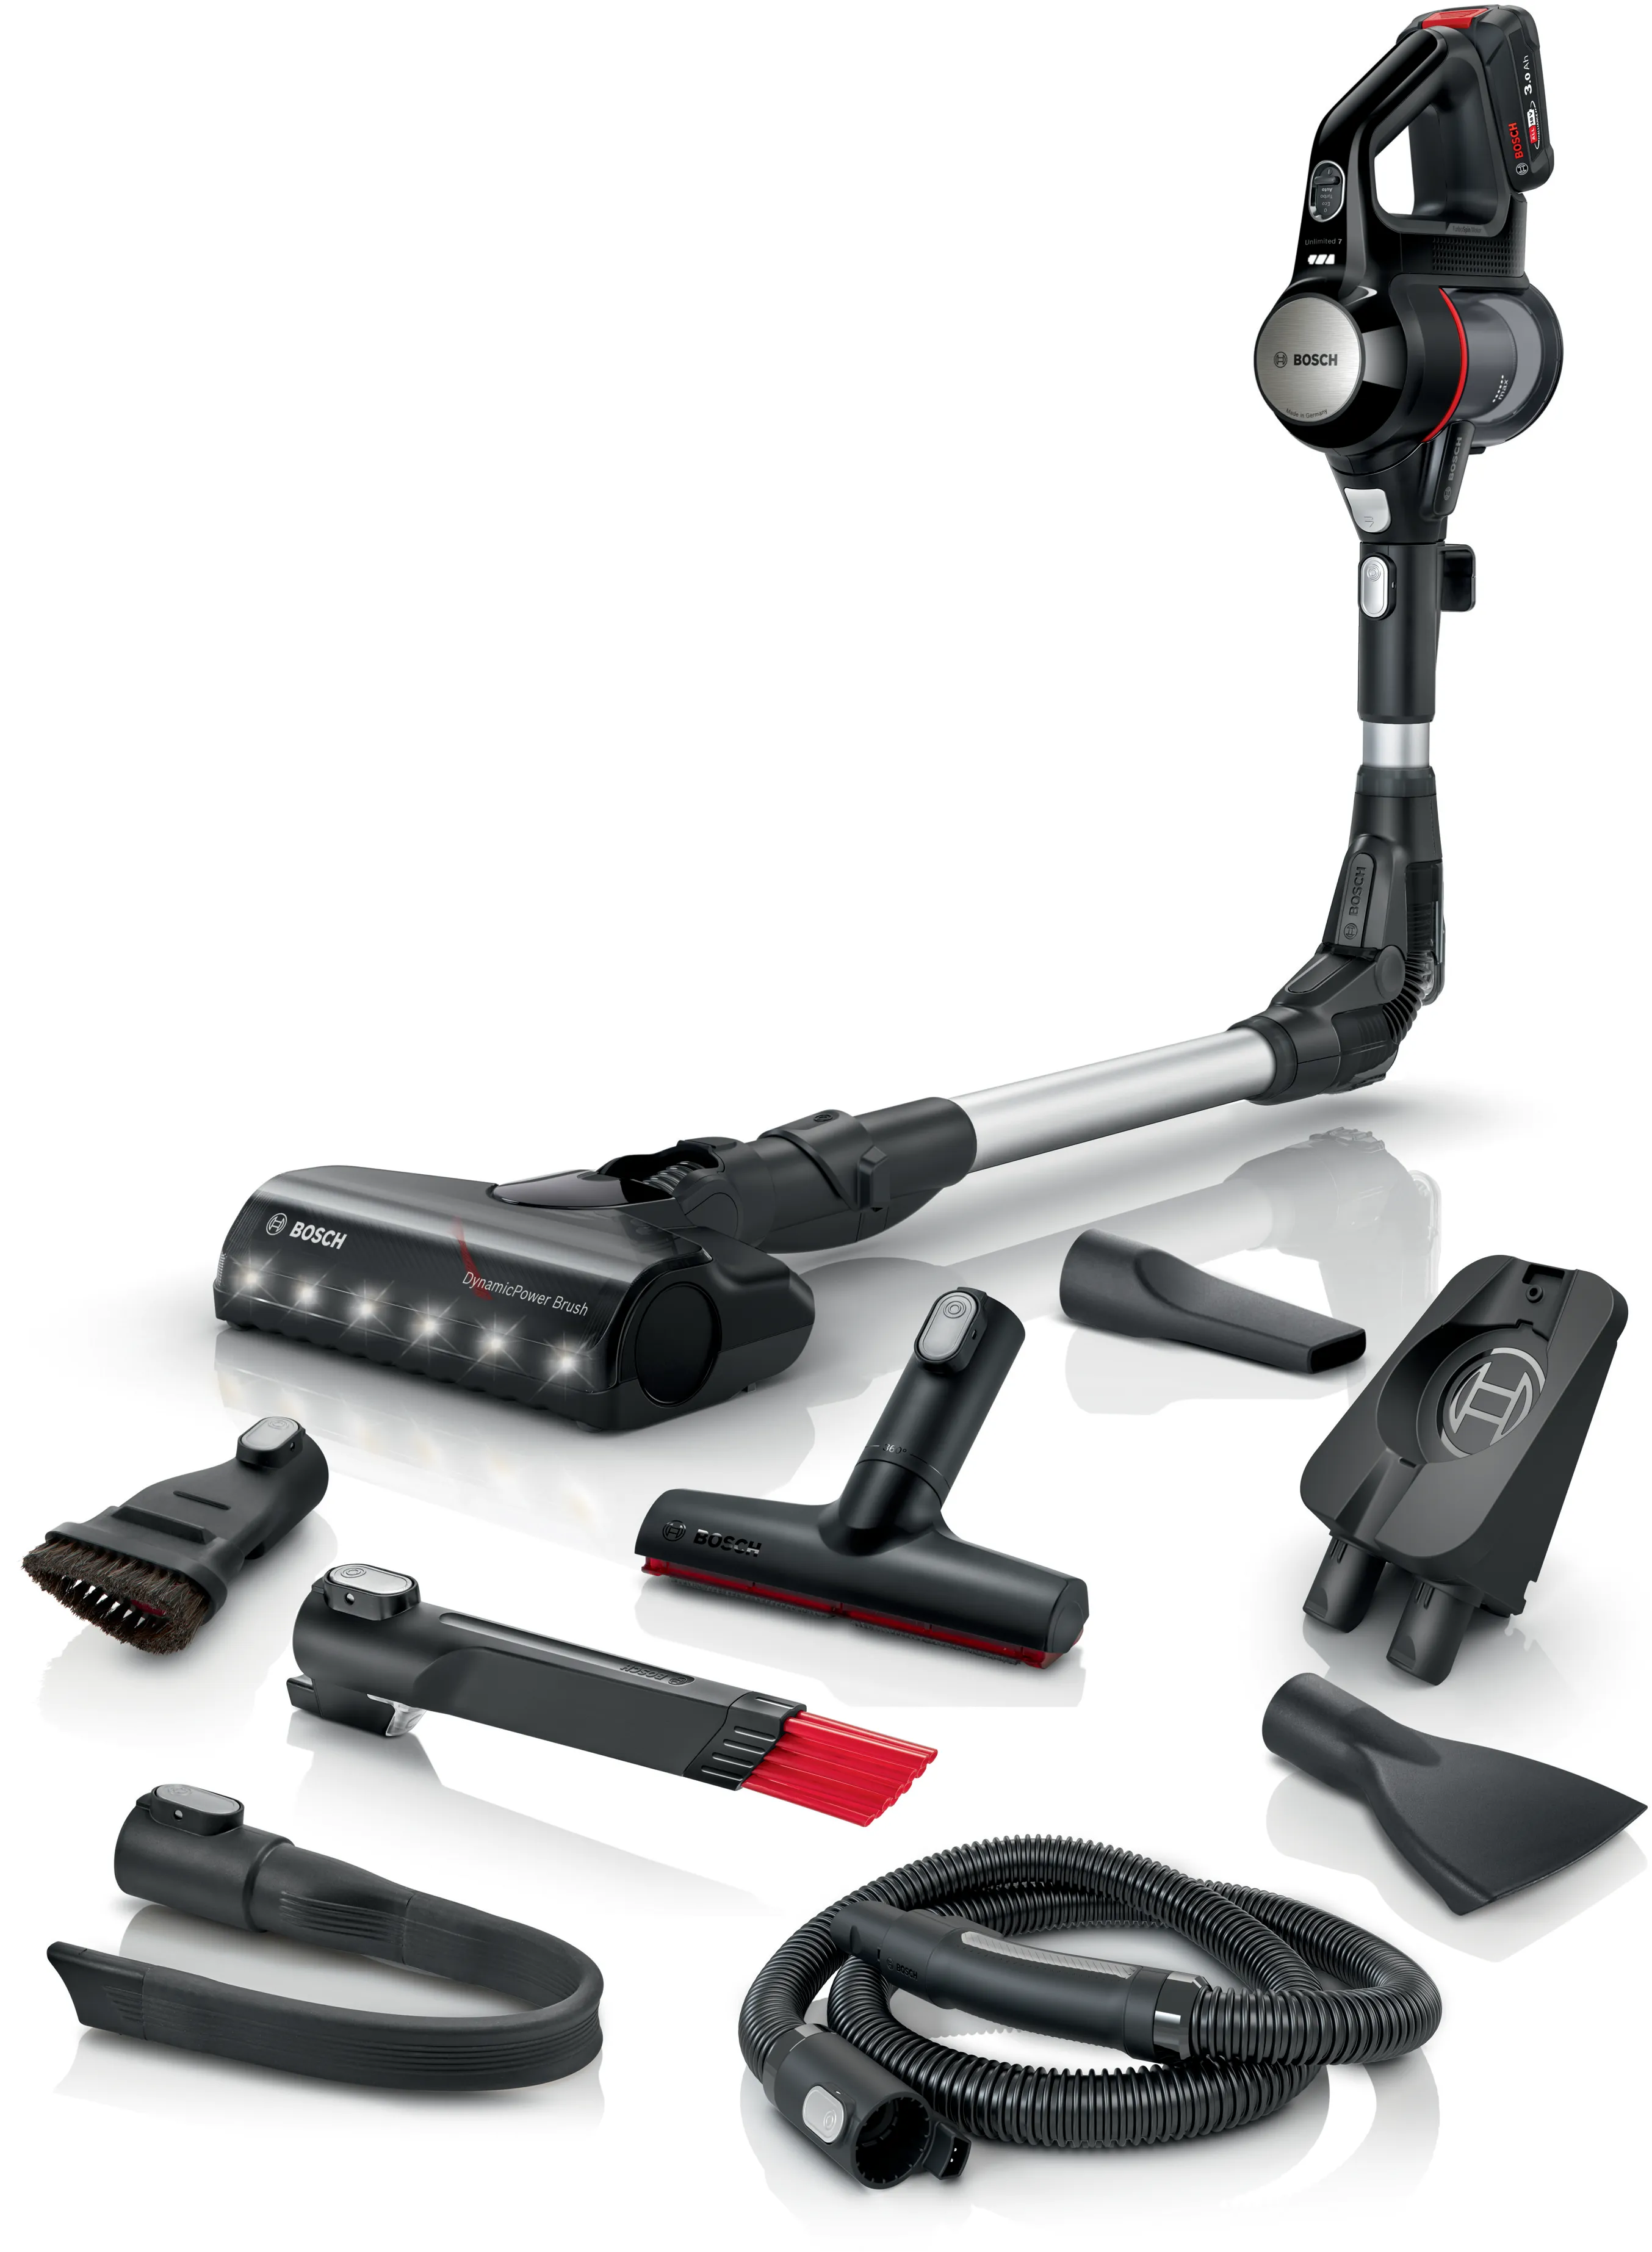 Rechargeable vacuum cleaner Unlimited 7 Black 